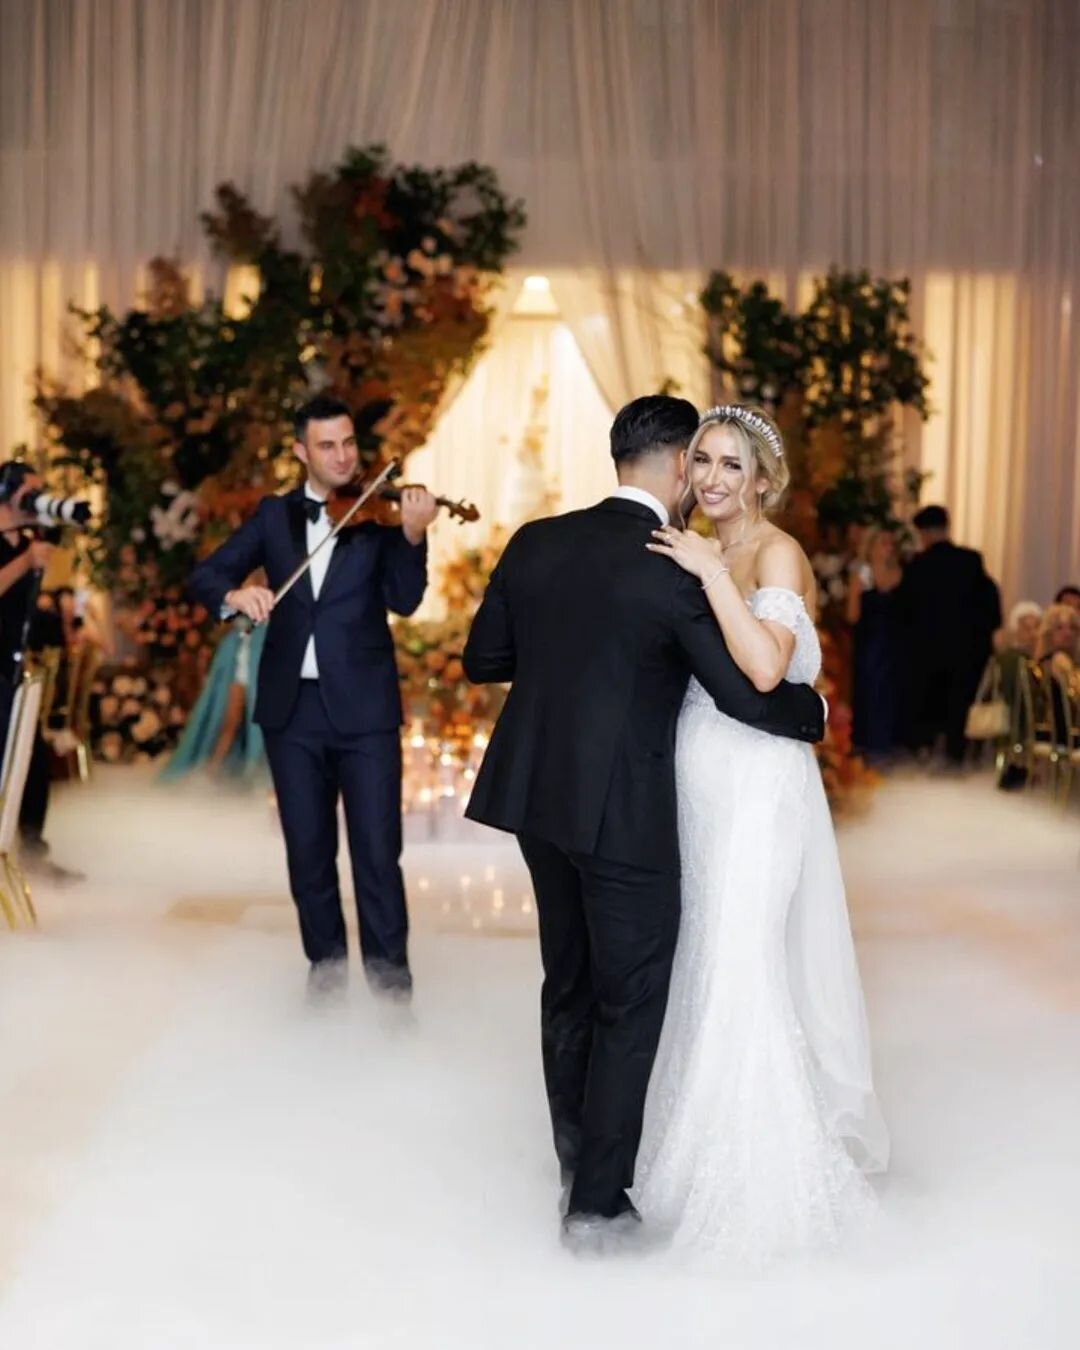 Take us back to this dreamy autumn wedding...𝓸𝓷𝓮 𝓶𝓸𝓷𝓽𝓱. 🍂🤎

📸 @moosho
🪄 @_myevents_

-----

✨️ #ENCHANTEDSTRINGS

🗓 Now booking 2023! Contact us for your event music needs by visiting the link in our bio. www.enchantedstrings.com
.
.
.
#